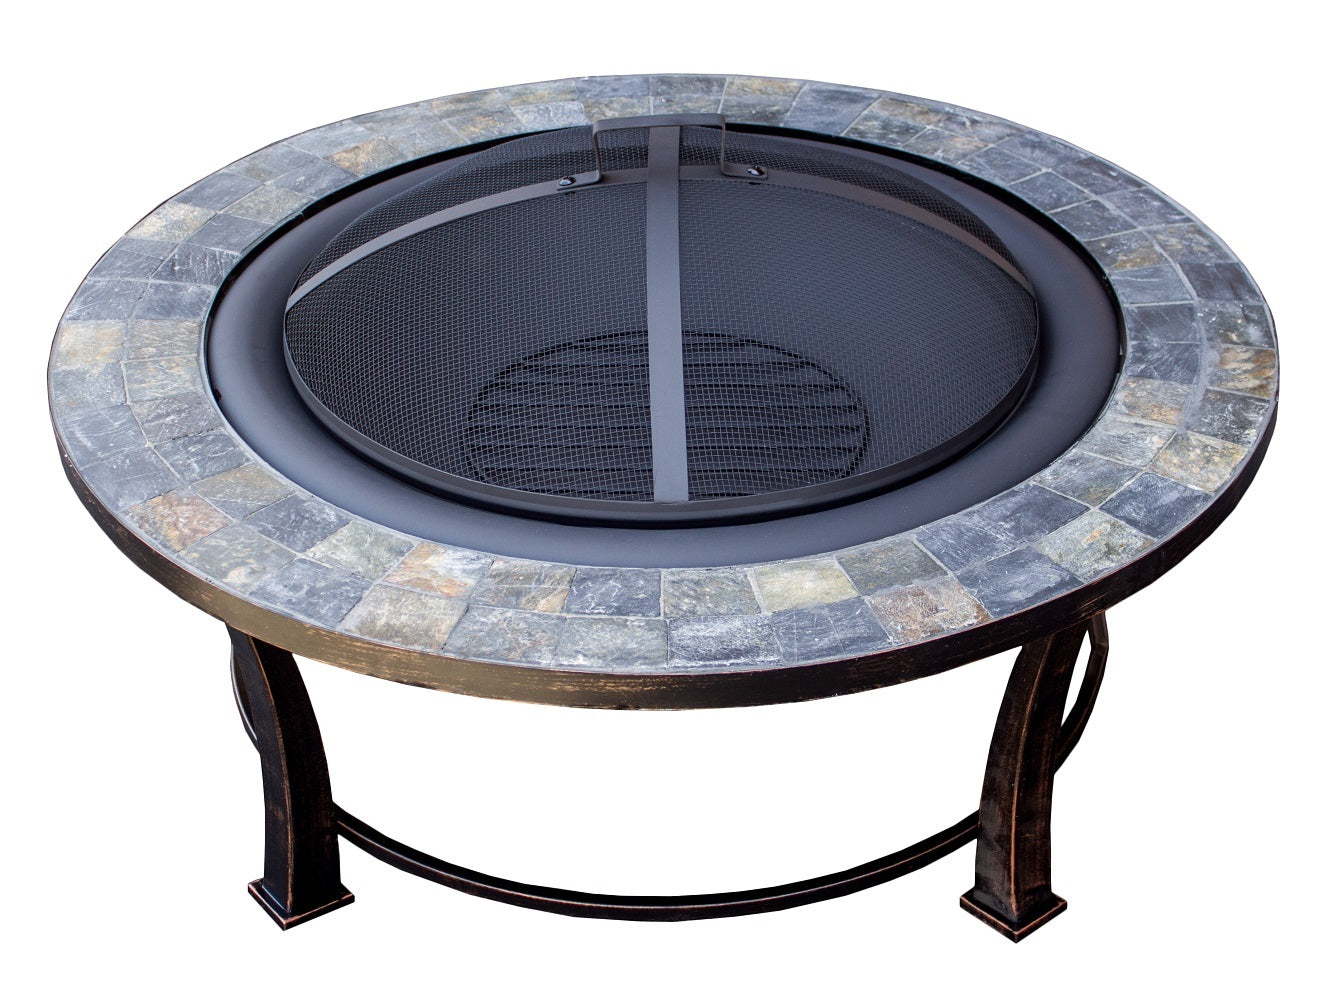 Outdoor Round Slate Top Wood Burning Fire Pit